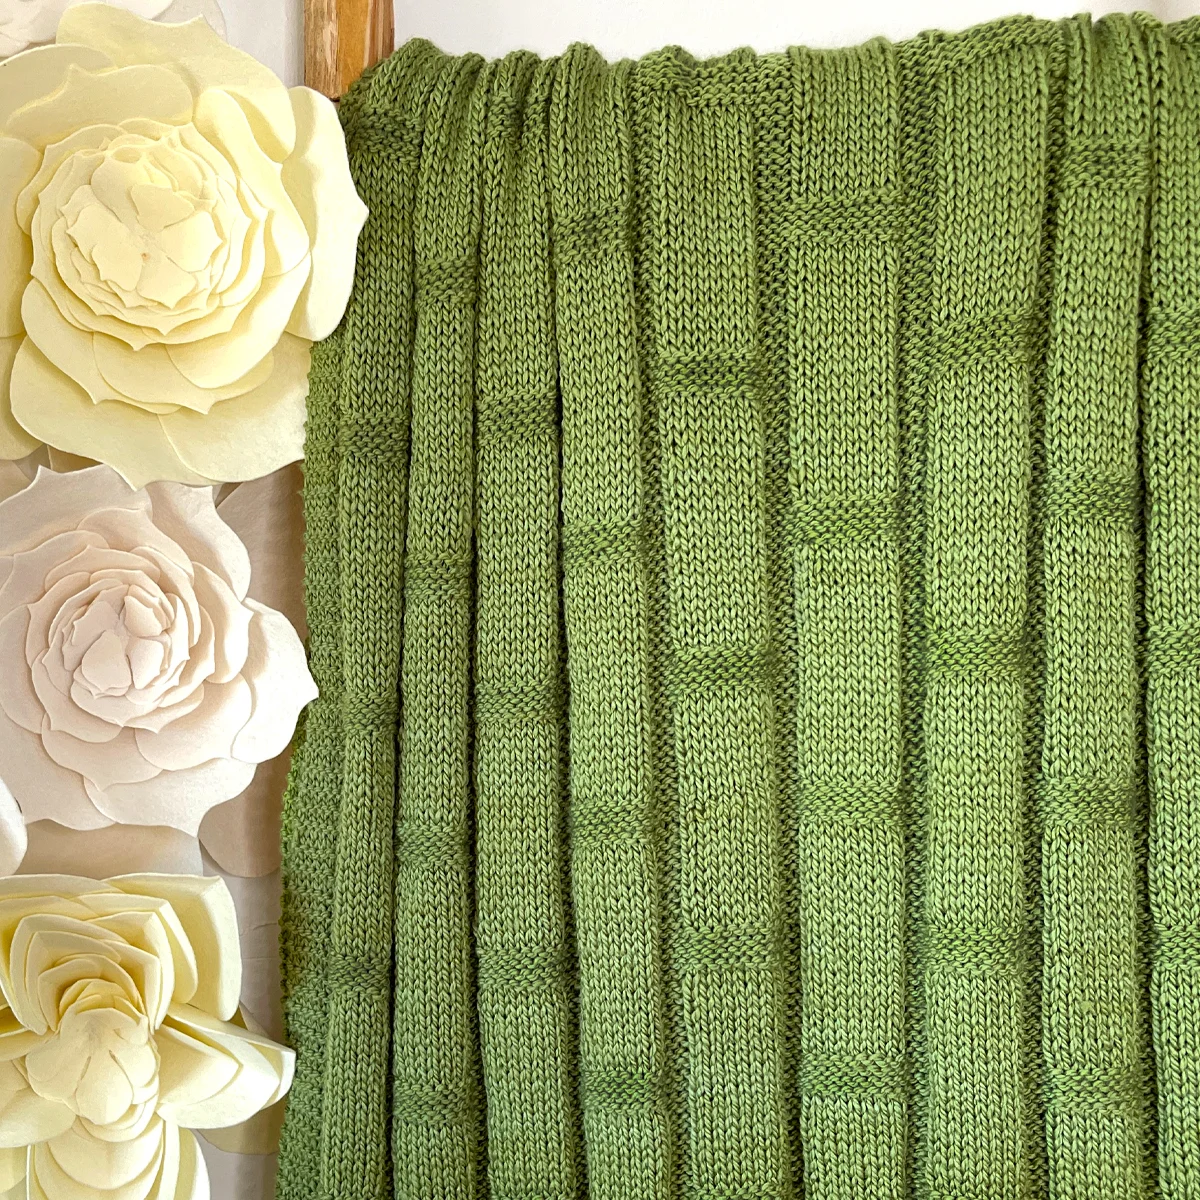 Knitted blanket in bamboo stitch texture in green colored yarn displayed on a wooden ladder.